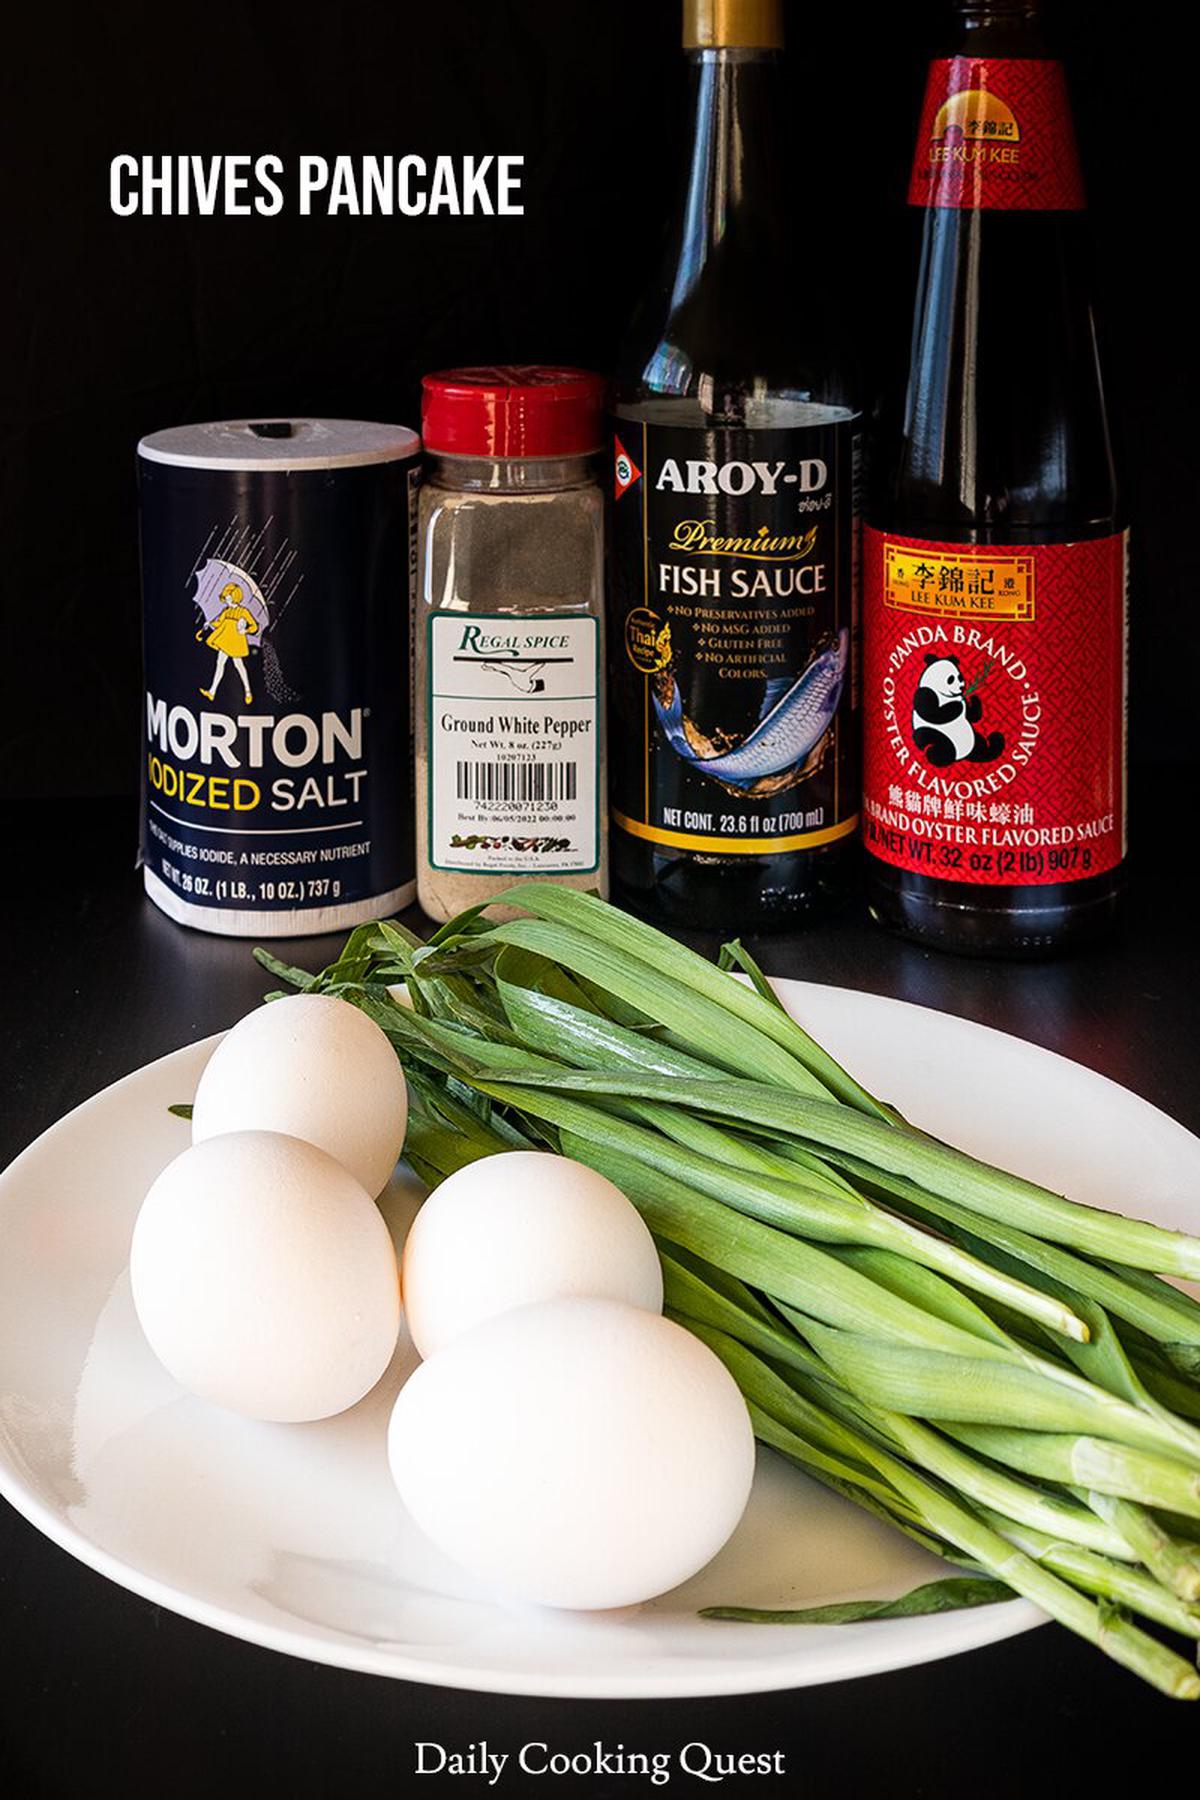 Ingredients for Chinese chives pancake: eggs, chives, oyster sauce, fish sauce, salt, and ground white pepper.